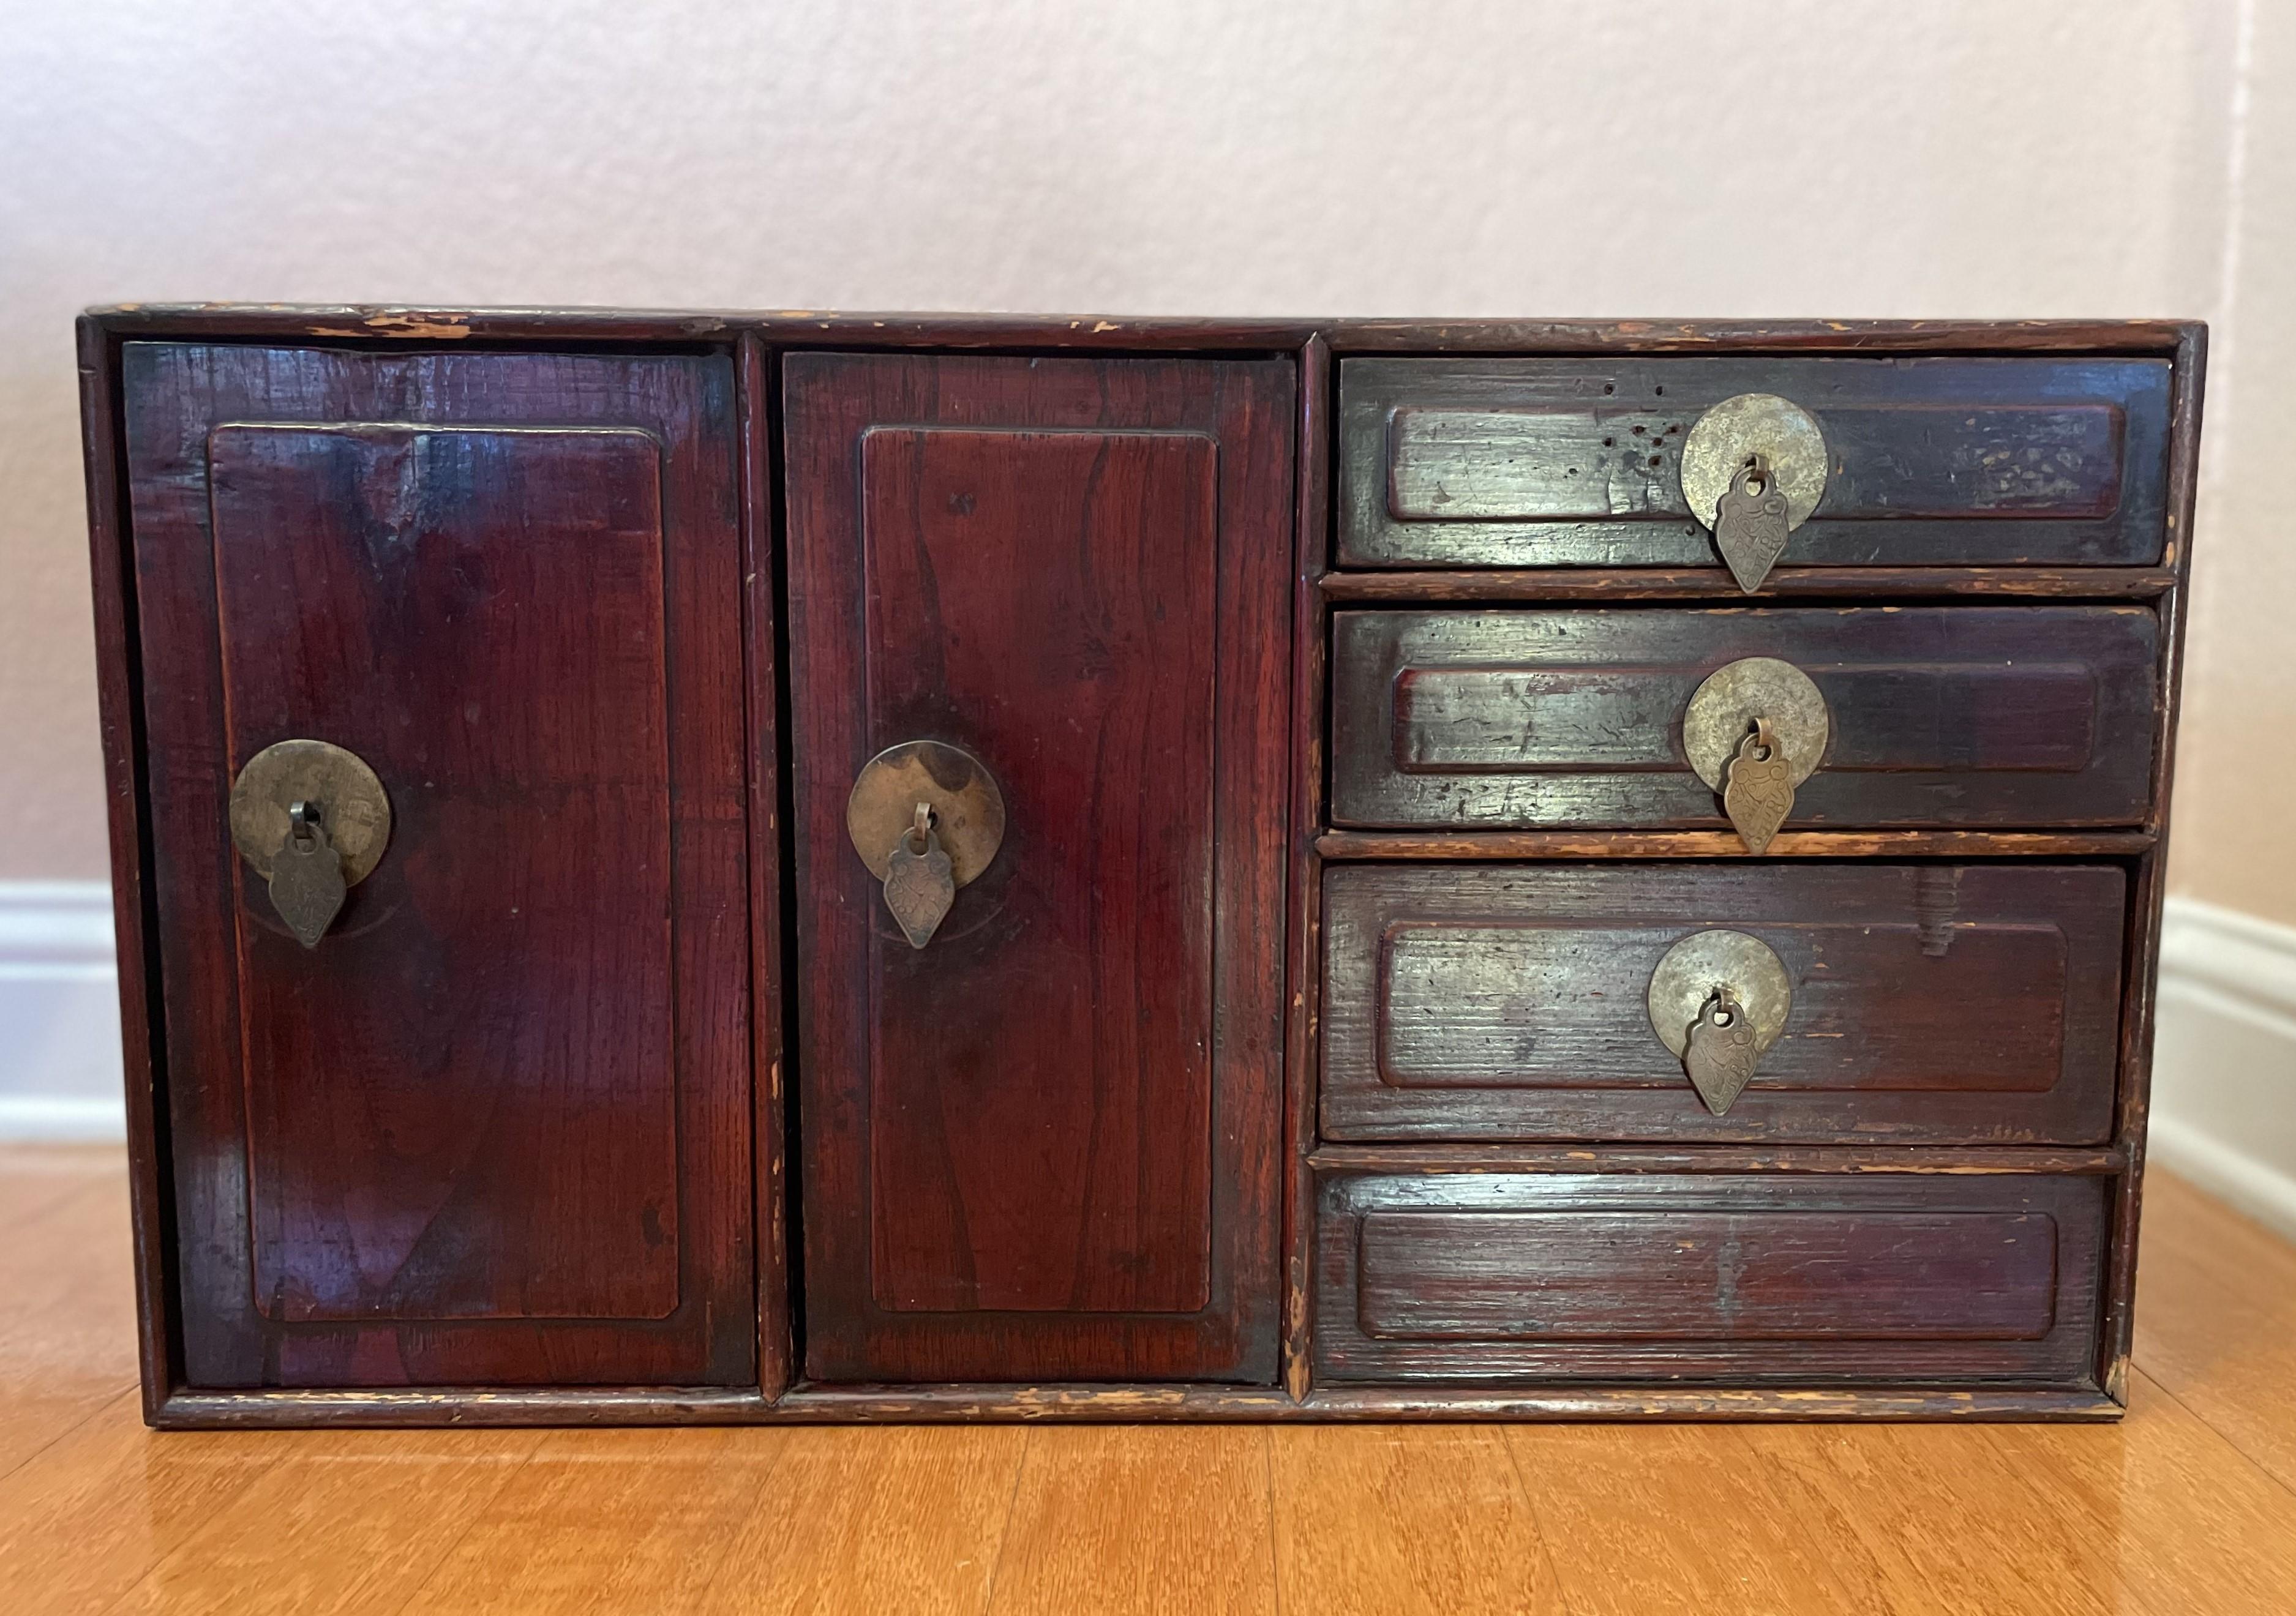 An antique Japanese Tansu with soulful Wabi-Sabi. It appears to be made of Elmwood with finely engraved brass hardware that has a subtle green patina, with an overall soft luster to the wood. This piece fits beautifully atop a console behind a study